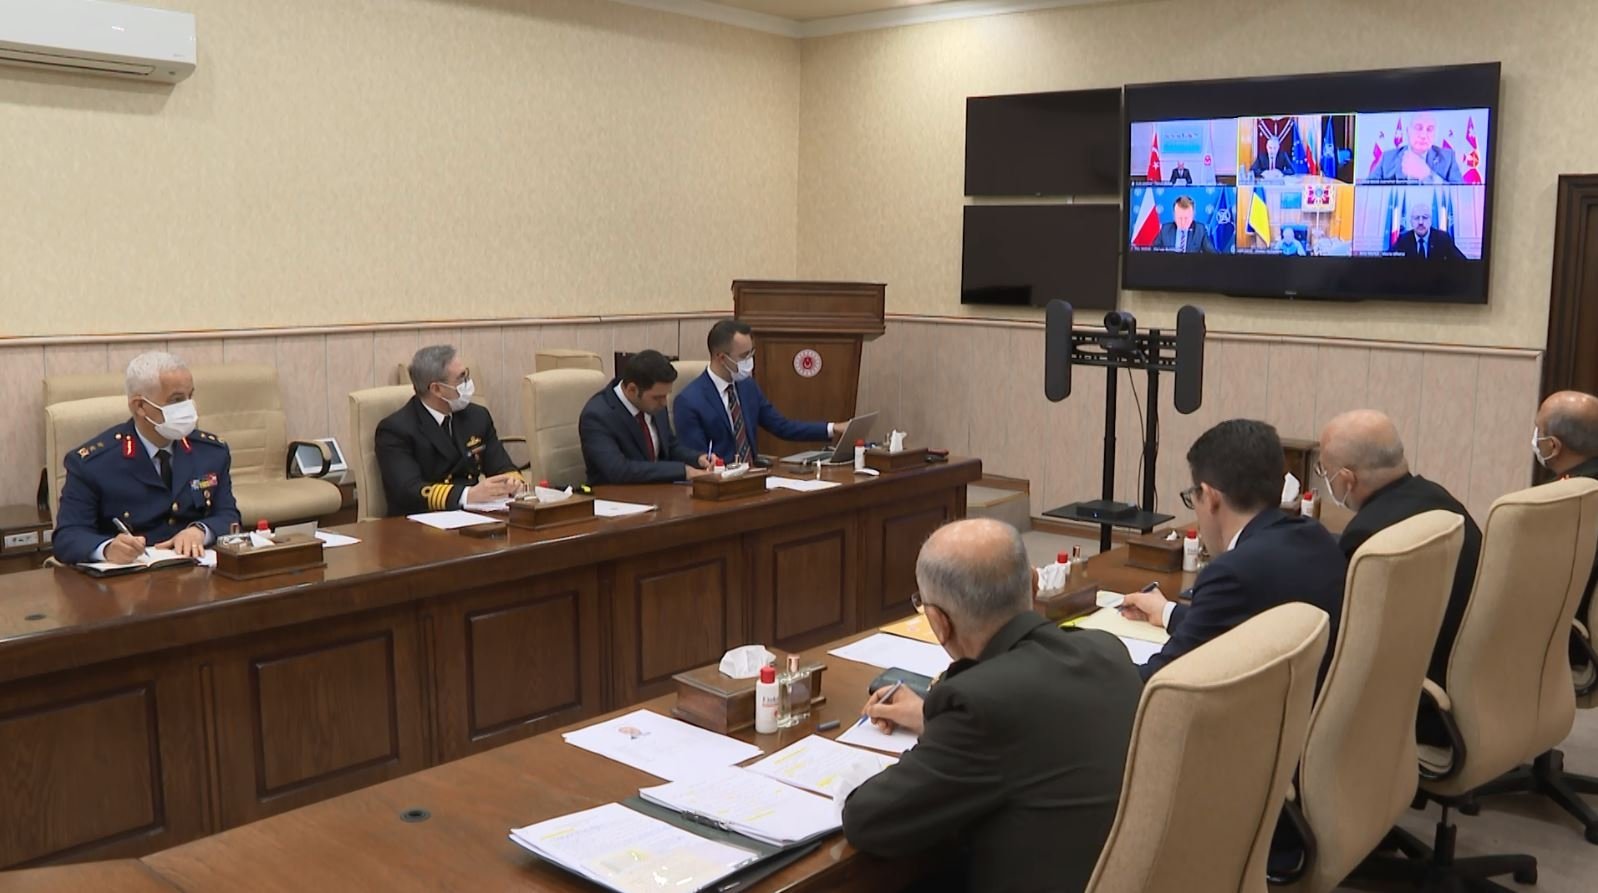 Defense Minister Hulusi Akar attends a videoconference with counterparts from Poland, Ukraine, Georgia, Bulgaria and Romania, April 7, 2022. (AA Photo)